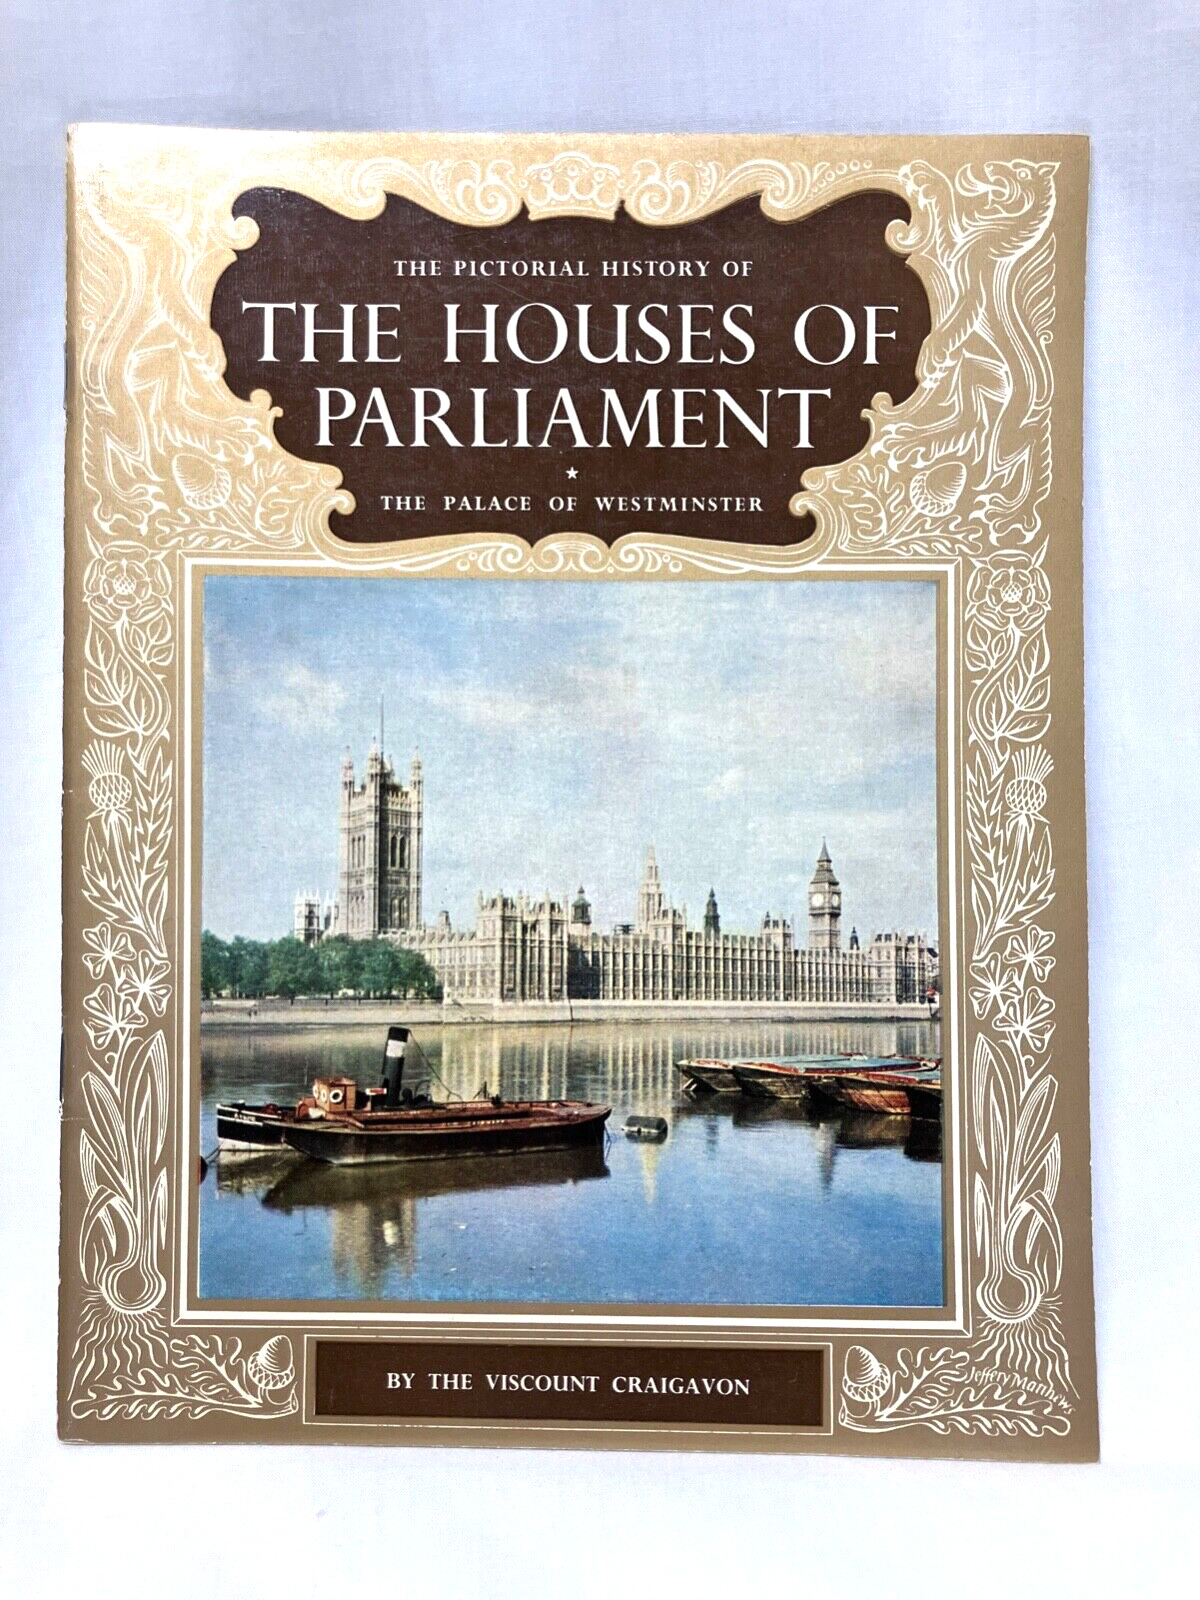 The Pictorial History of The HOUSES OF PARLIAMENT  by Viscount Craigavon, Pitkin